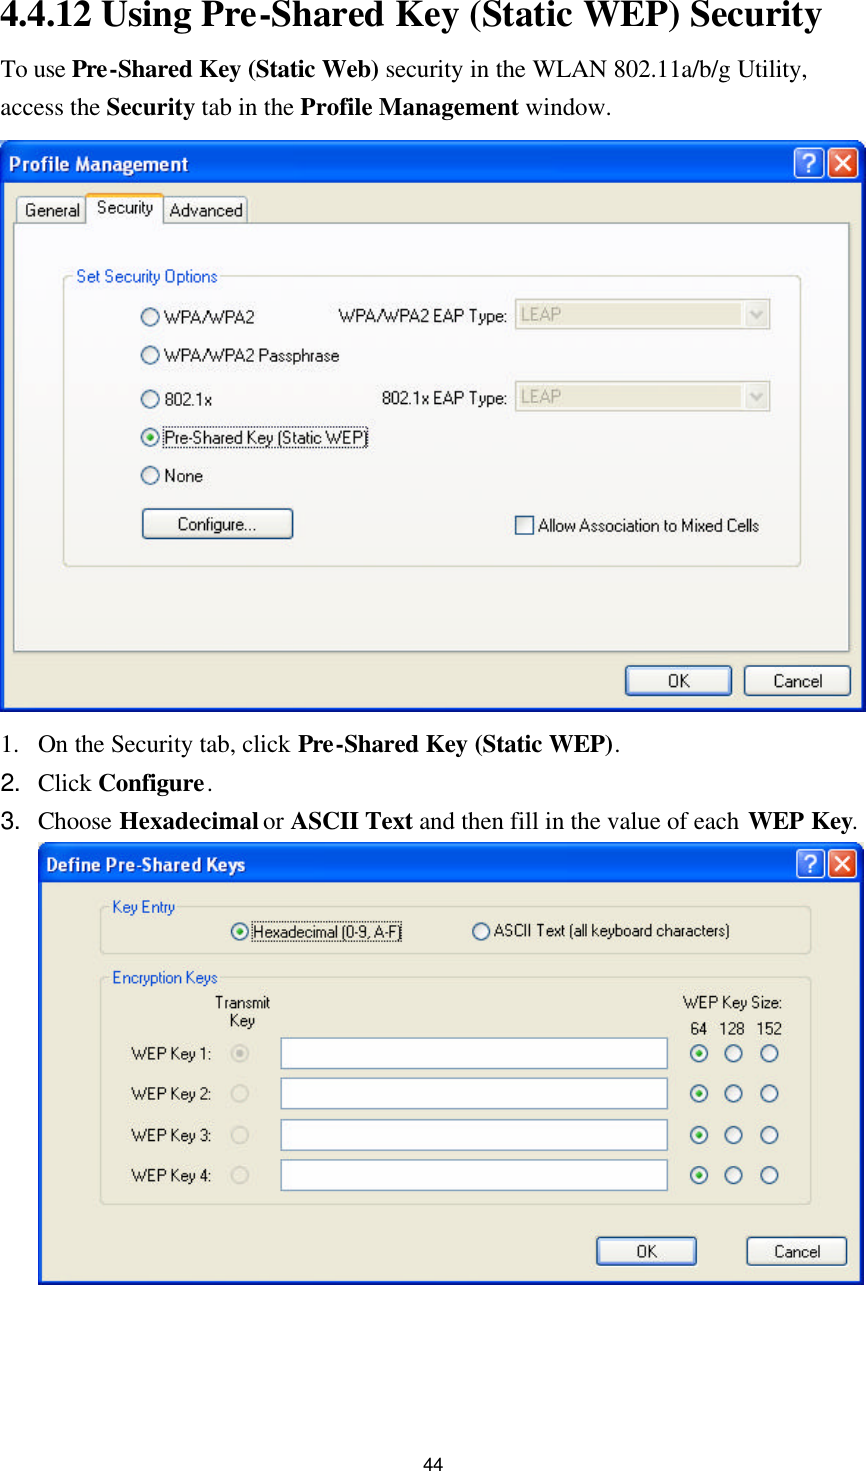 44 4.4.12 Using Pre-Shared Key (Static WEP) Security To use Pre-Shared Key (Static Web) security in the WLAN 802.11a/b/g Utility, access the Security tab in the Profile Management window.  1. On the Security tab, click Pre-Shared Key (Static WEP). 2. Click Configure. 3. Choose Hexadecimal or ASCII Text and then fill in the value of each WEP Key.   